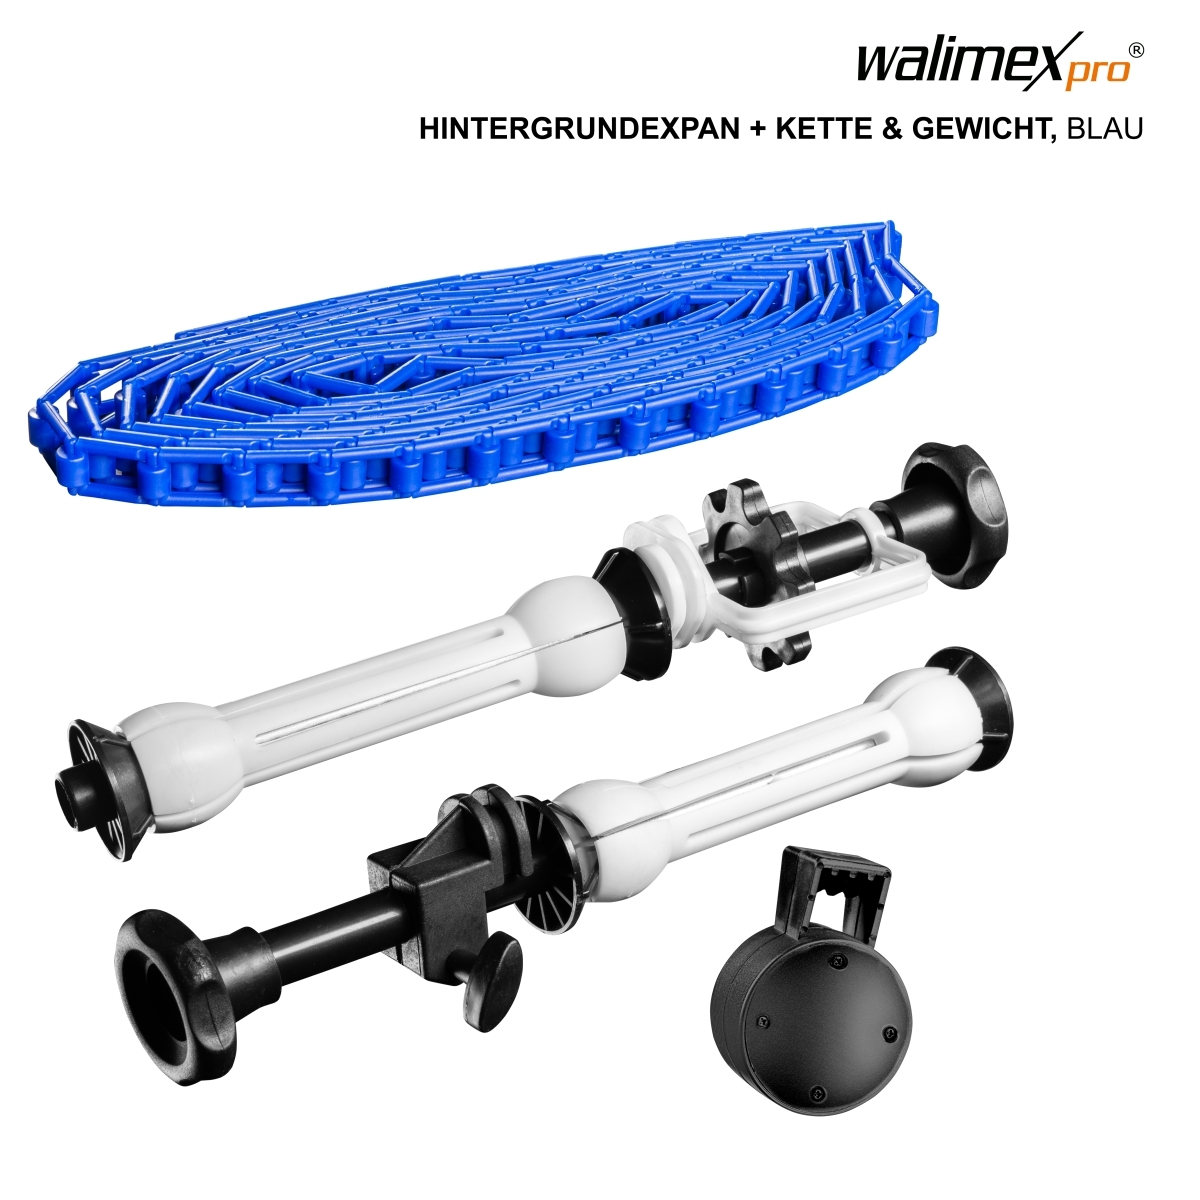 Walimex Background Expan + Chain & Weight, blue